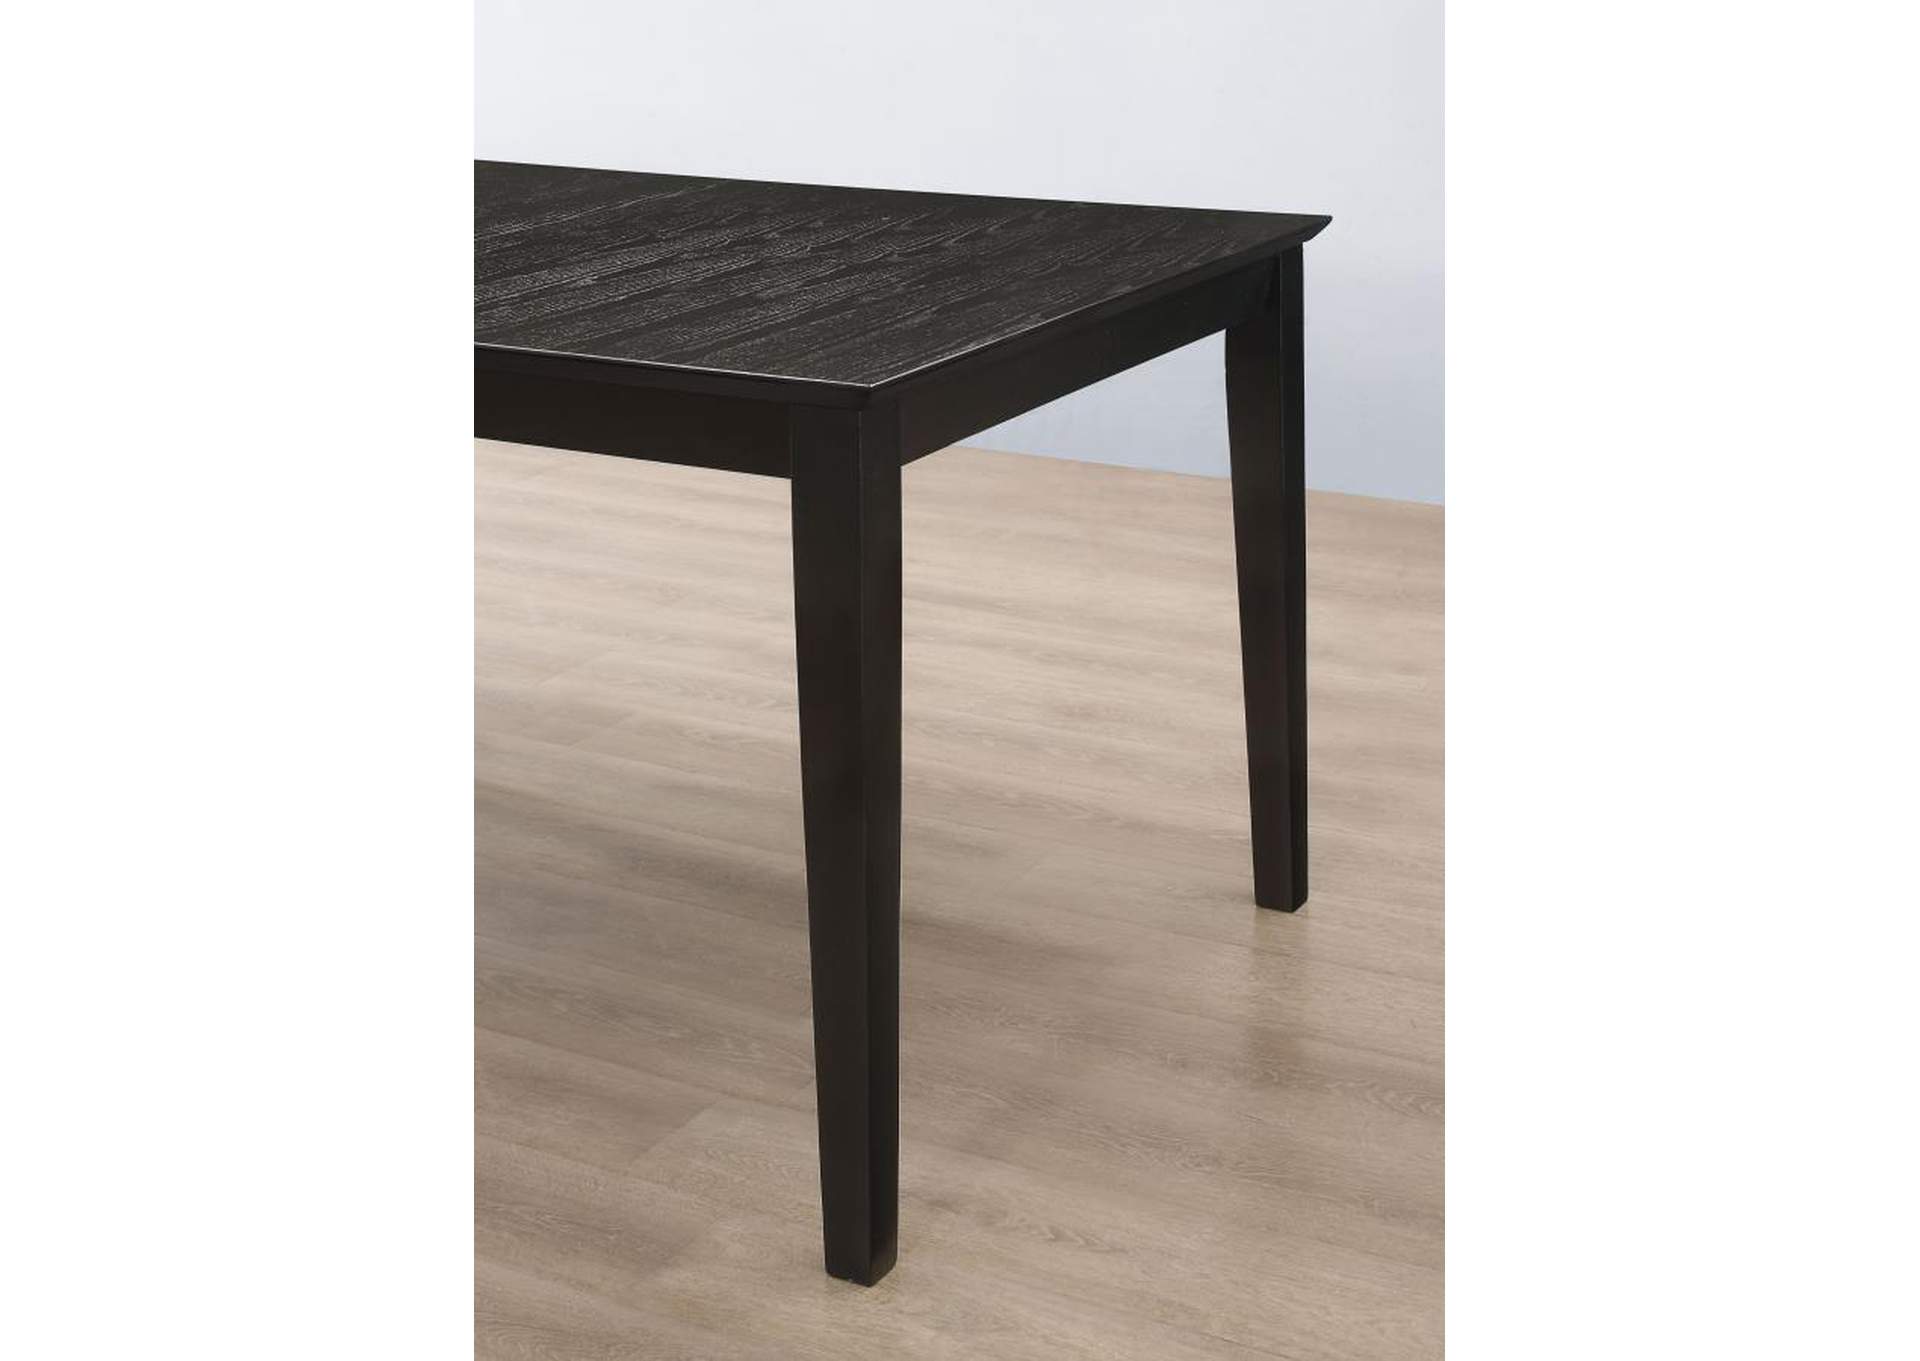 Louise Rectangular Dining Table with Extension Leaf Black,Coaster Furniture